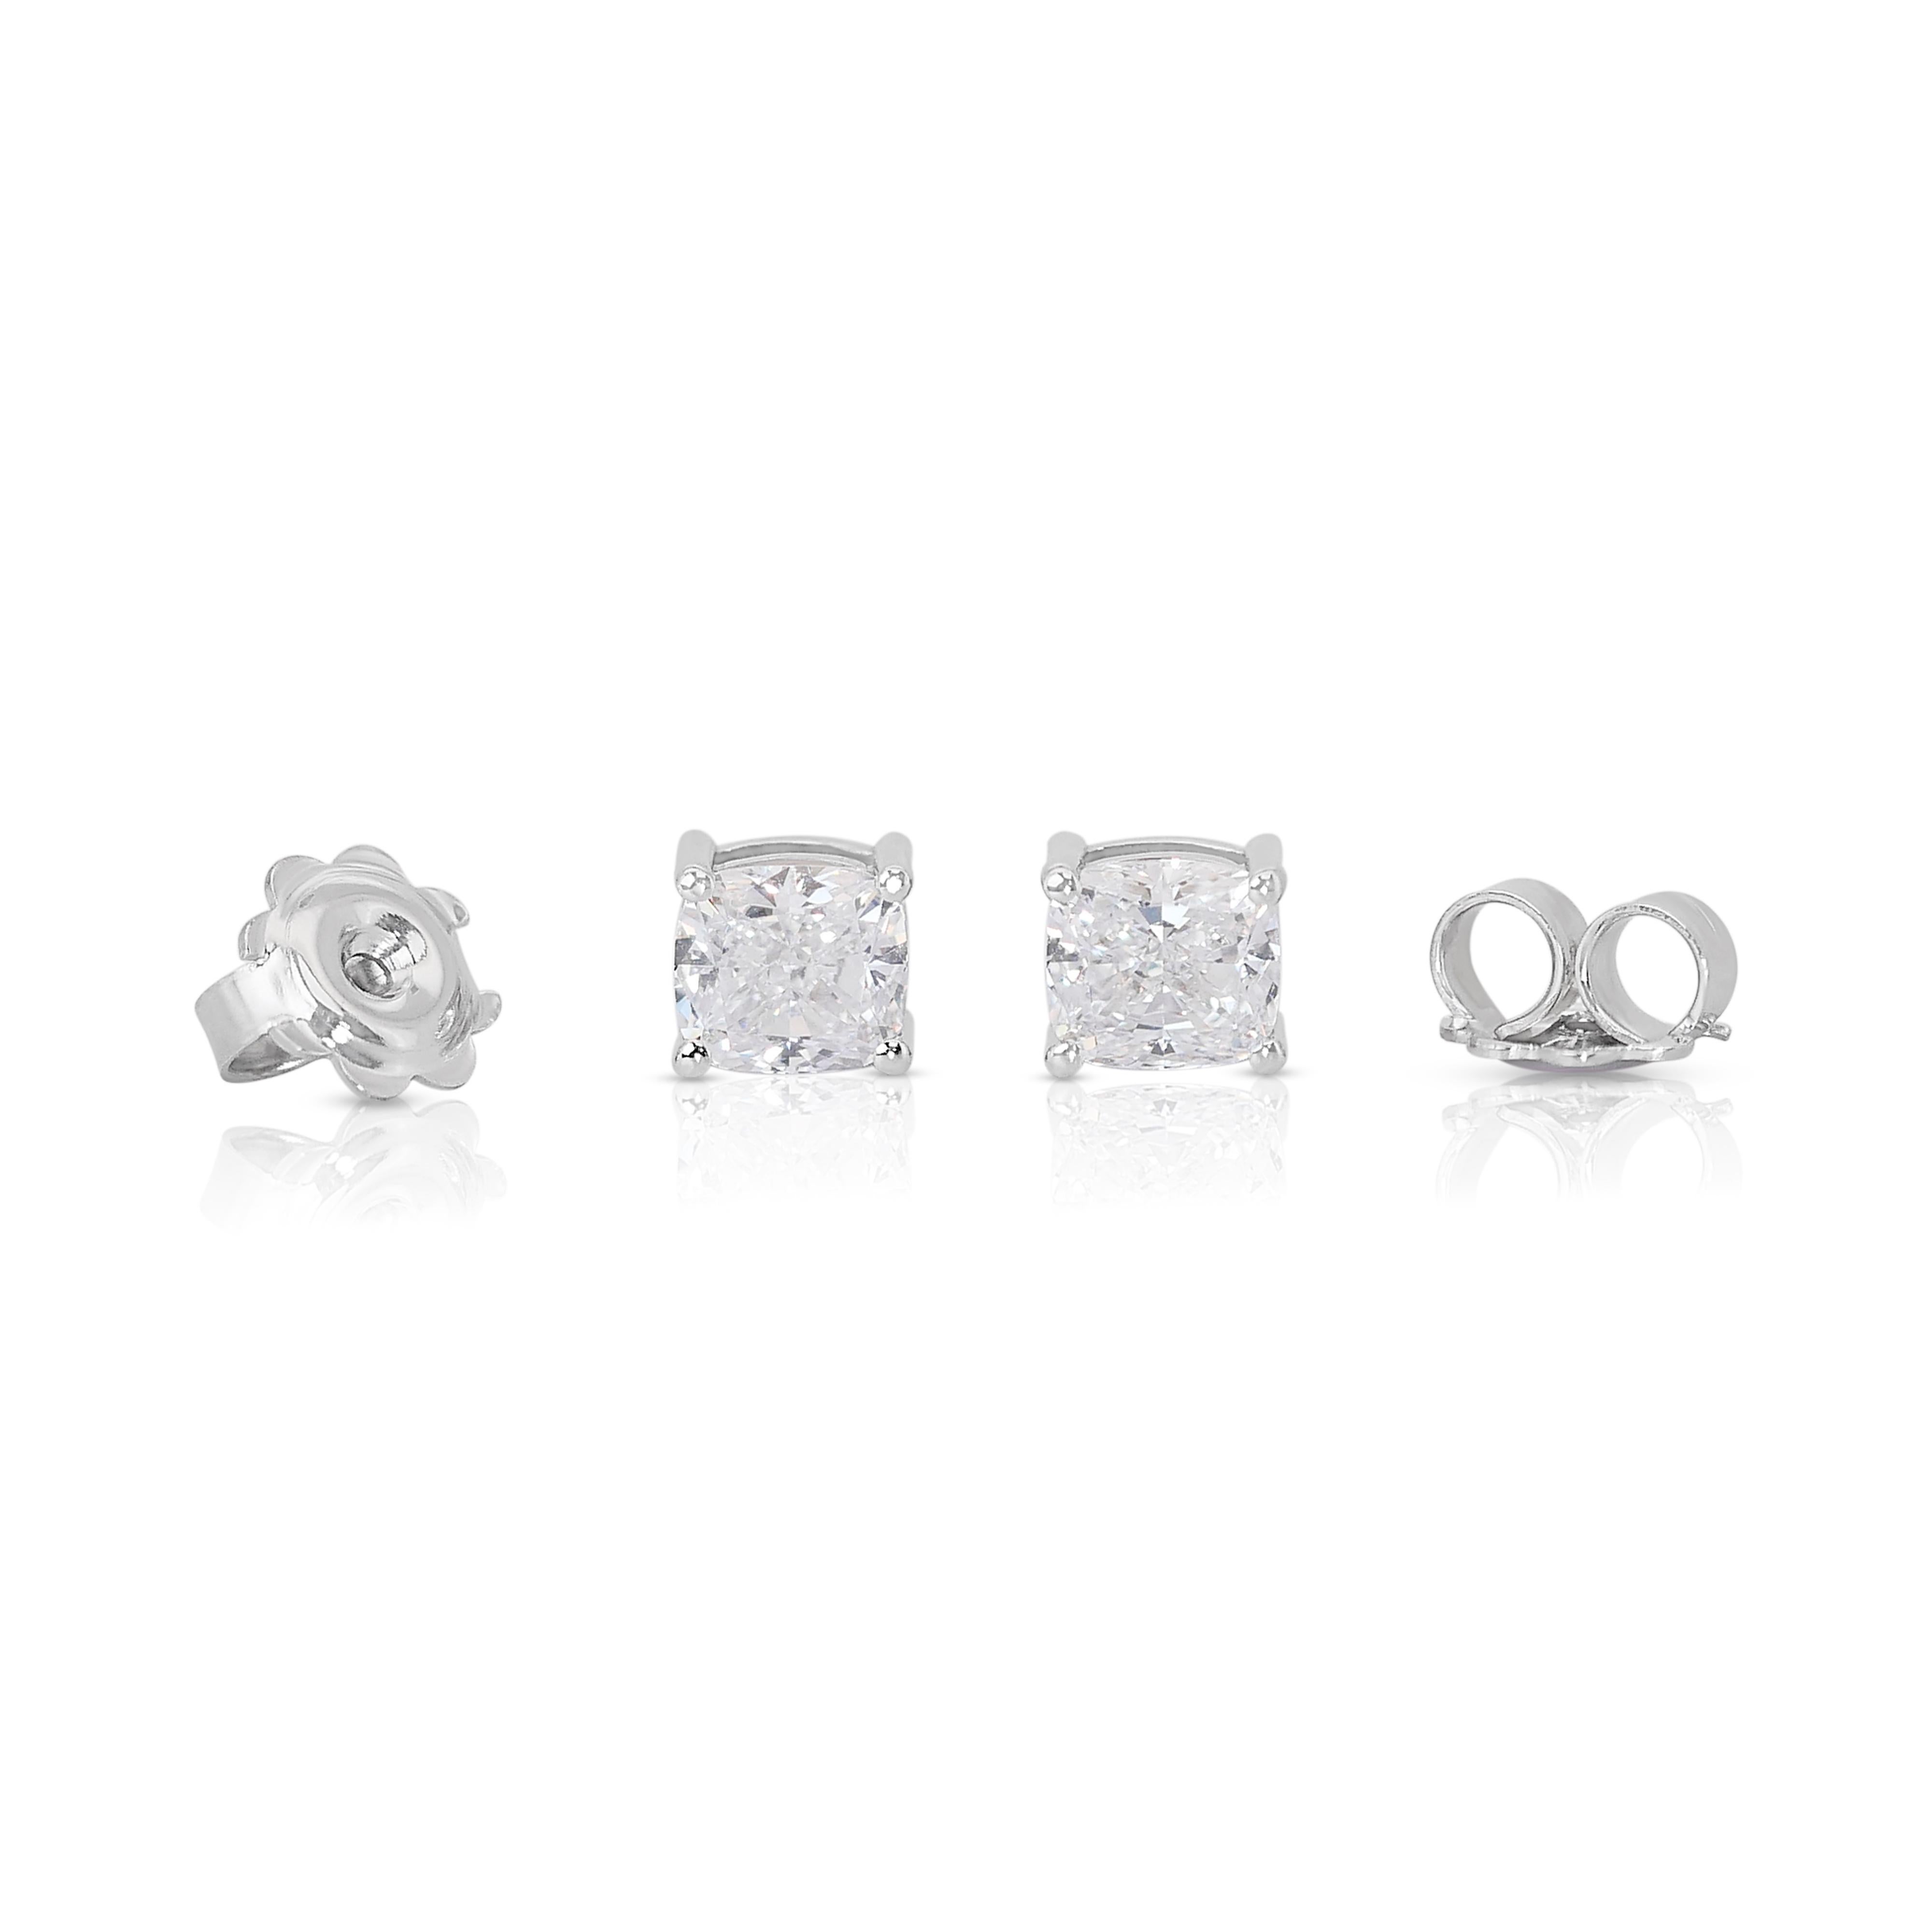 Lustrous 1.60ct Diamonds Stud Earrings in 18k White Gold - GIA Certified For Sale 1